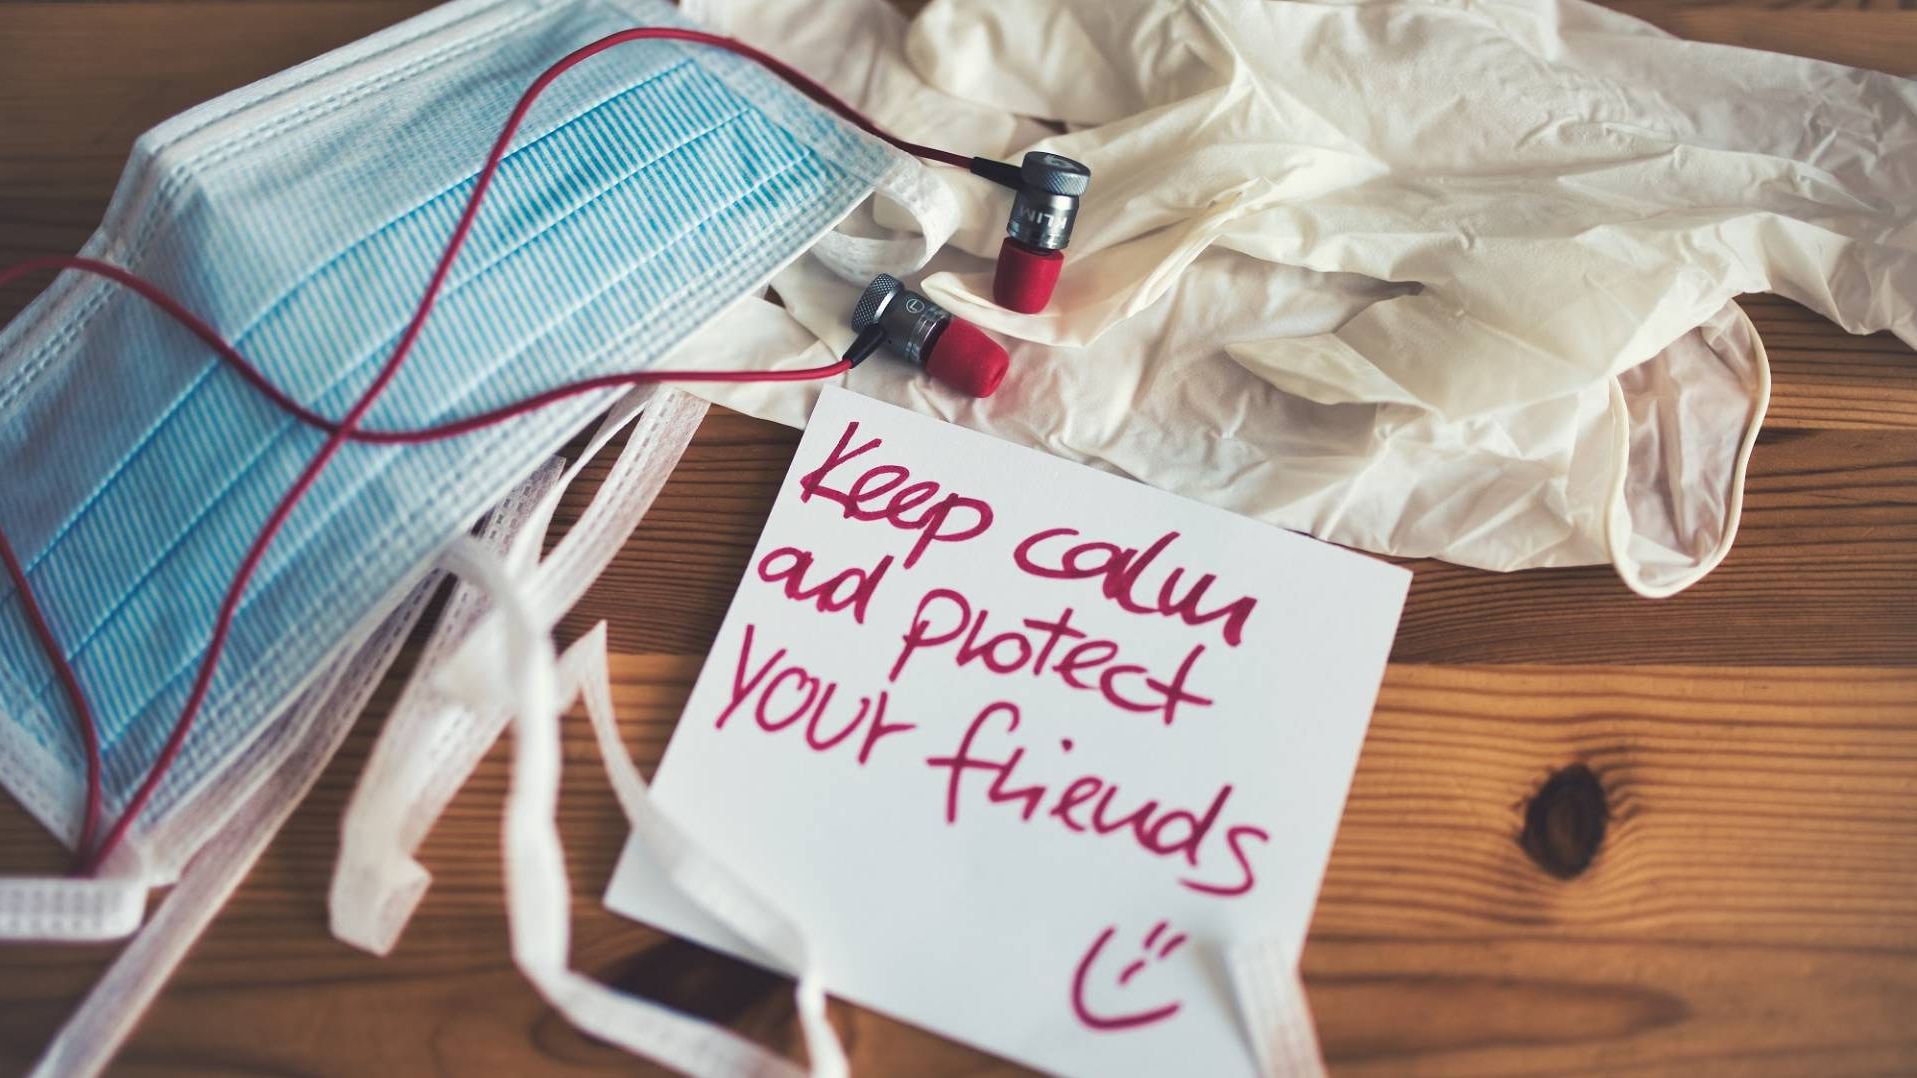 Face masks on a table and a note that says Keep calm and protect your friends